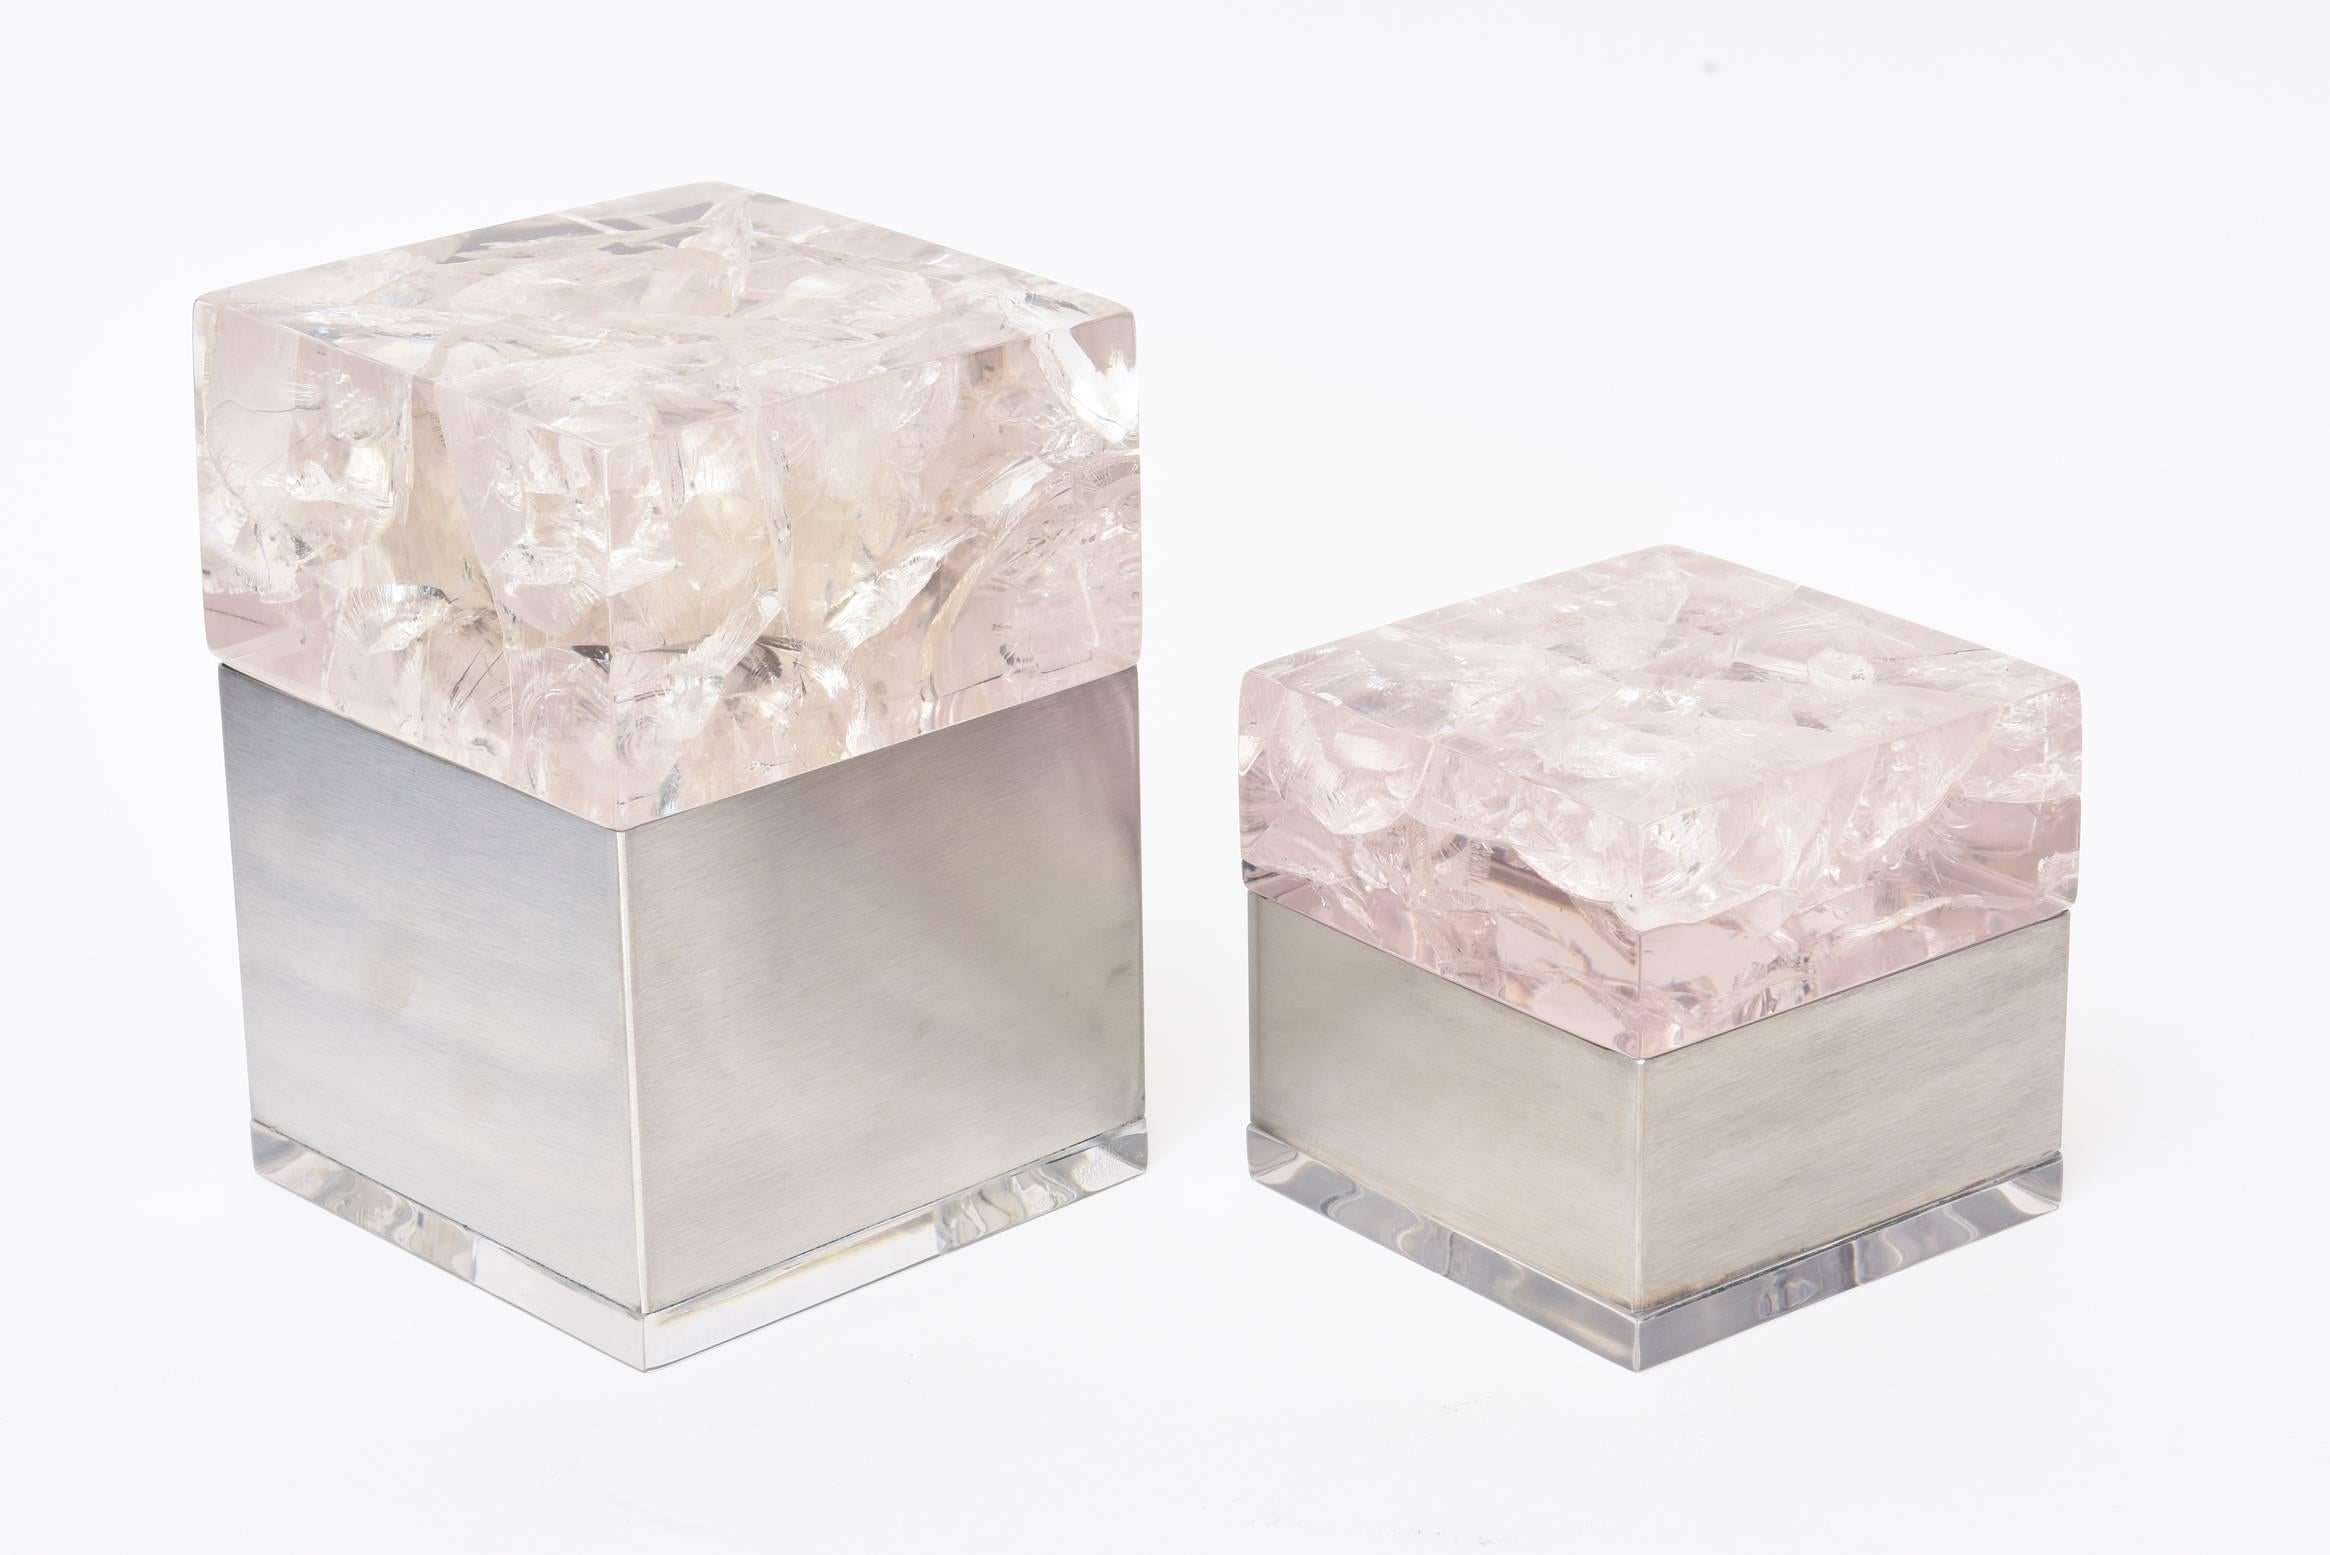 These amazing sculptural French vintage Pierre Giraudon pair of boxes are composed of an encasing of fractal embedded lucite as the tops that sit on brushed stainless steel bottoms with a small Lucite base. They are more on the rare side. The two